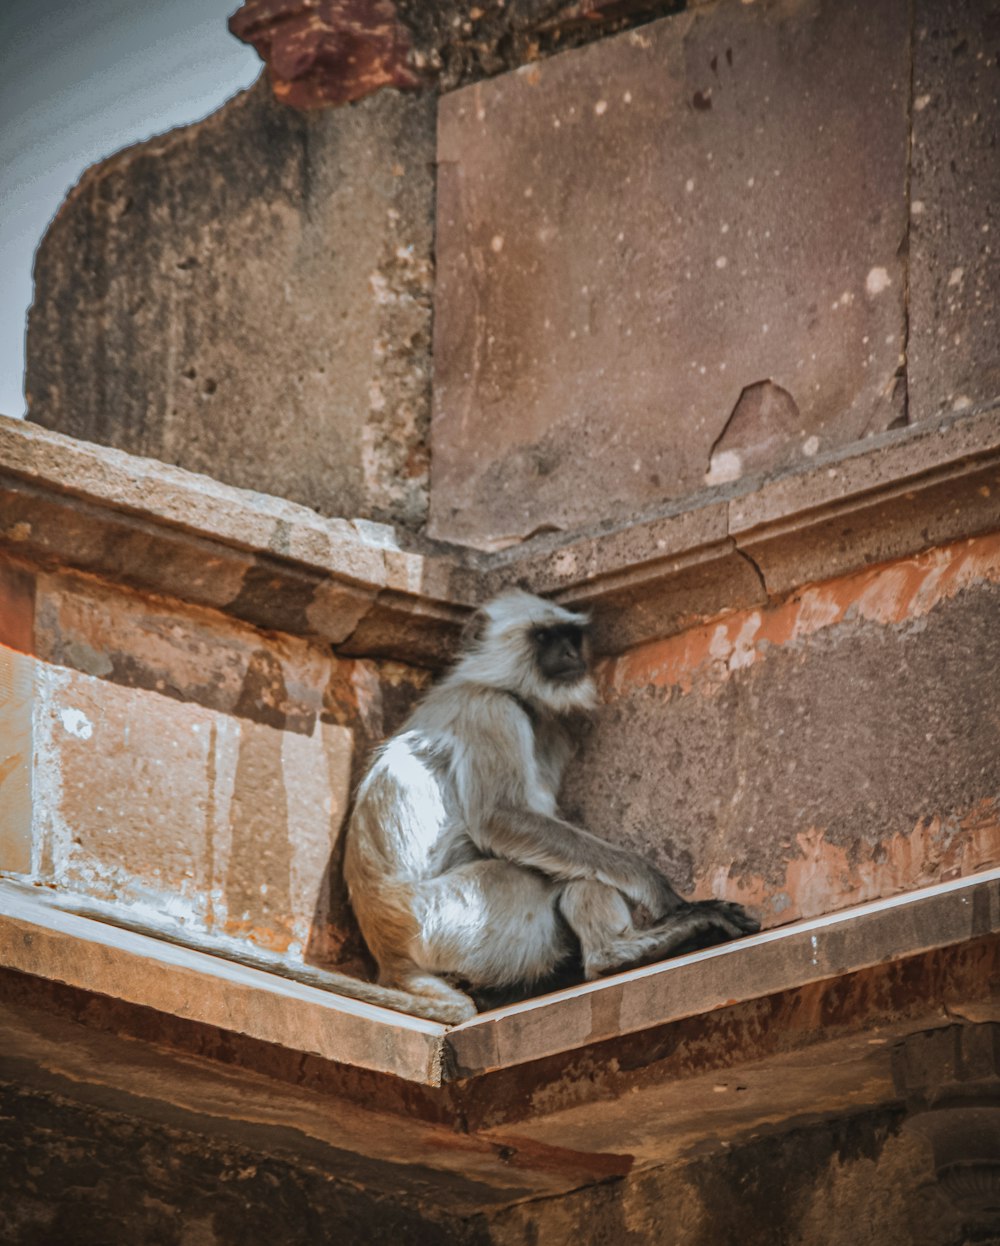 a monkey is sitting on the ledge of a building